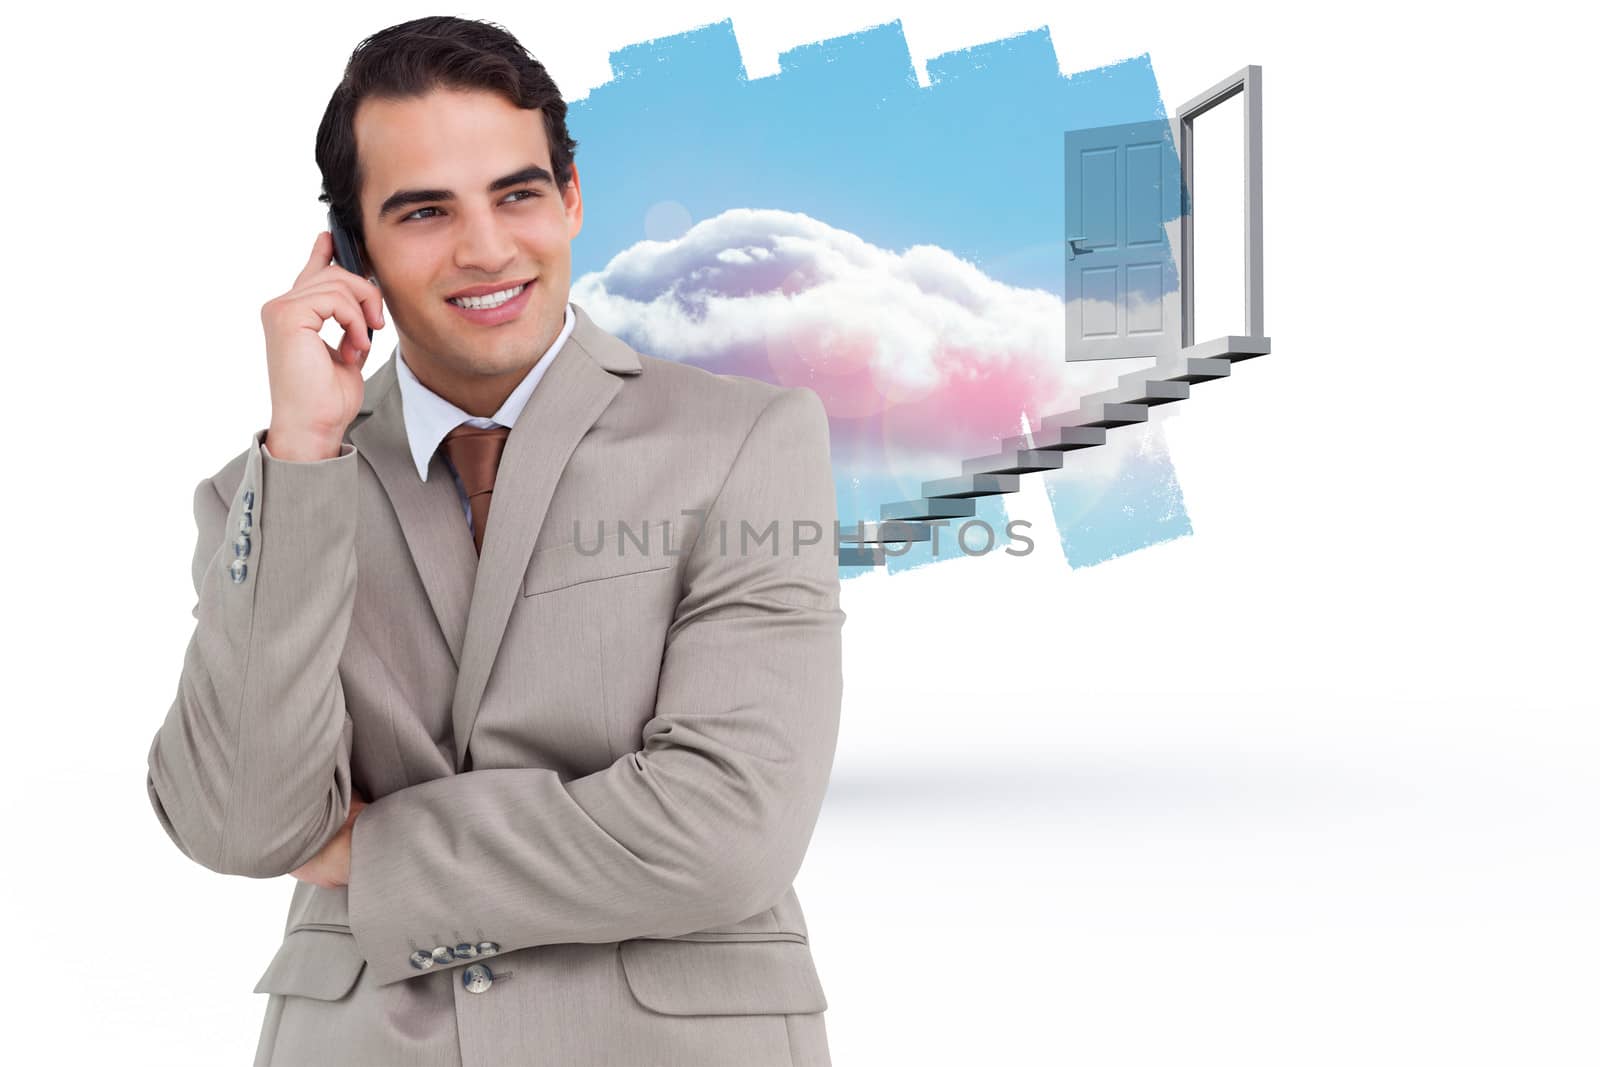 Smiling salesman on his cellphone against abstract screen in room showing cloudy sky